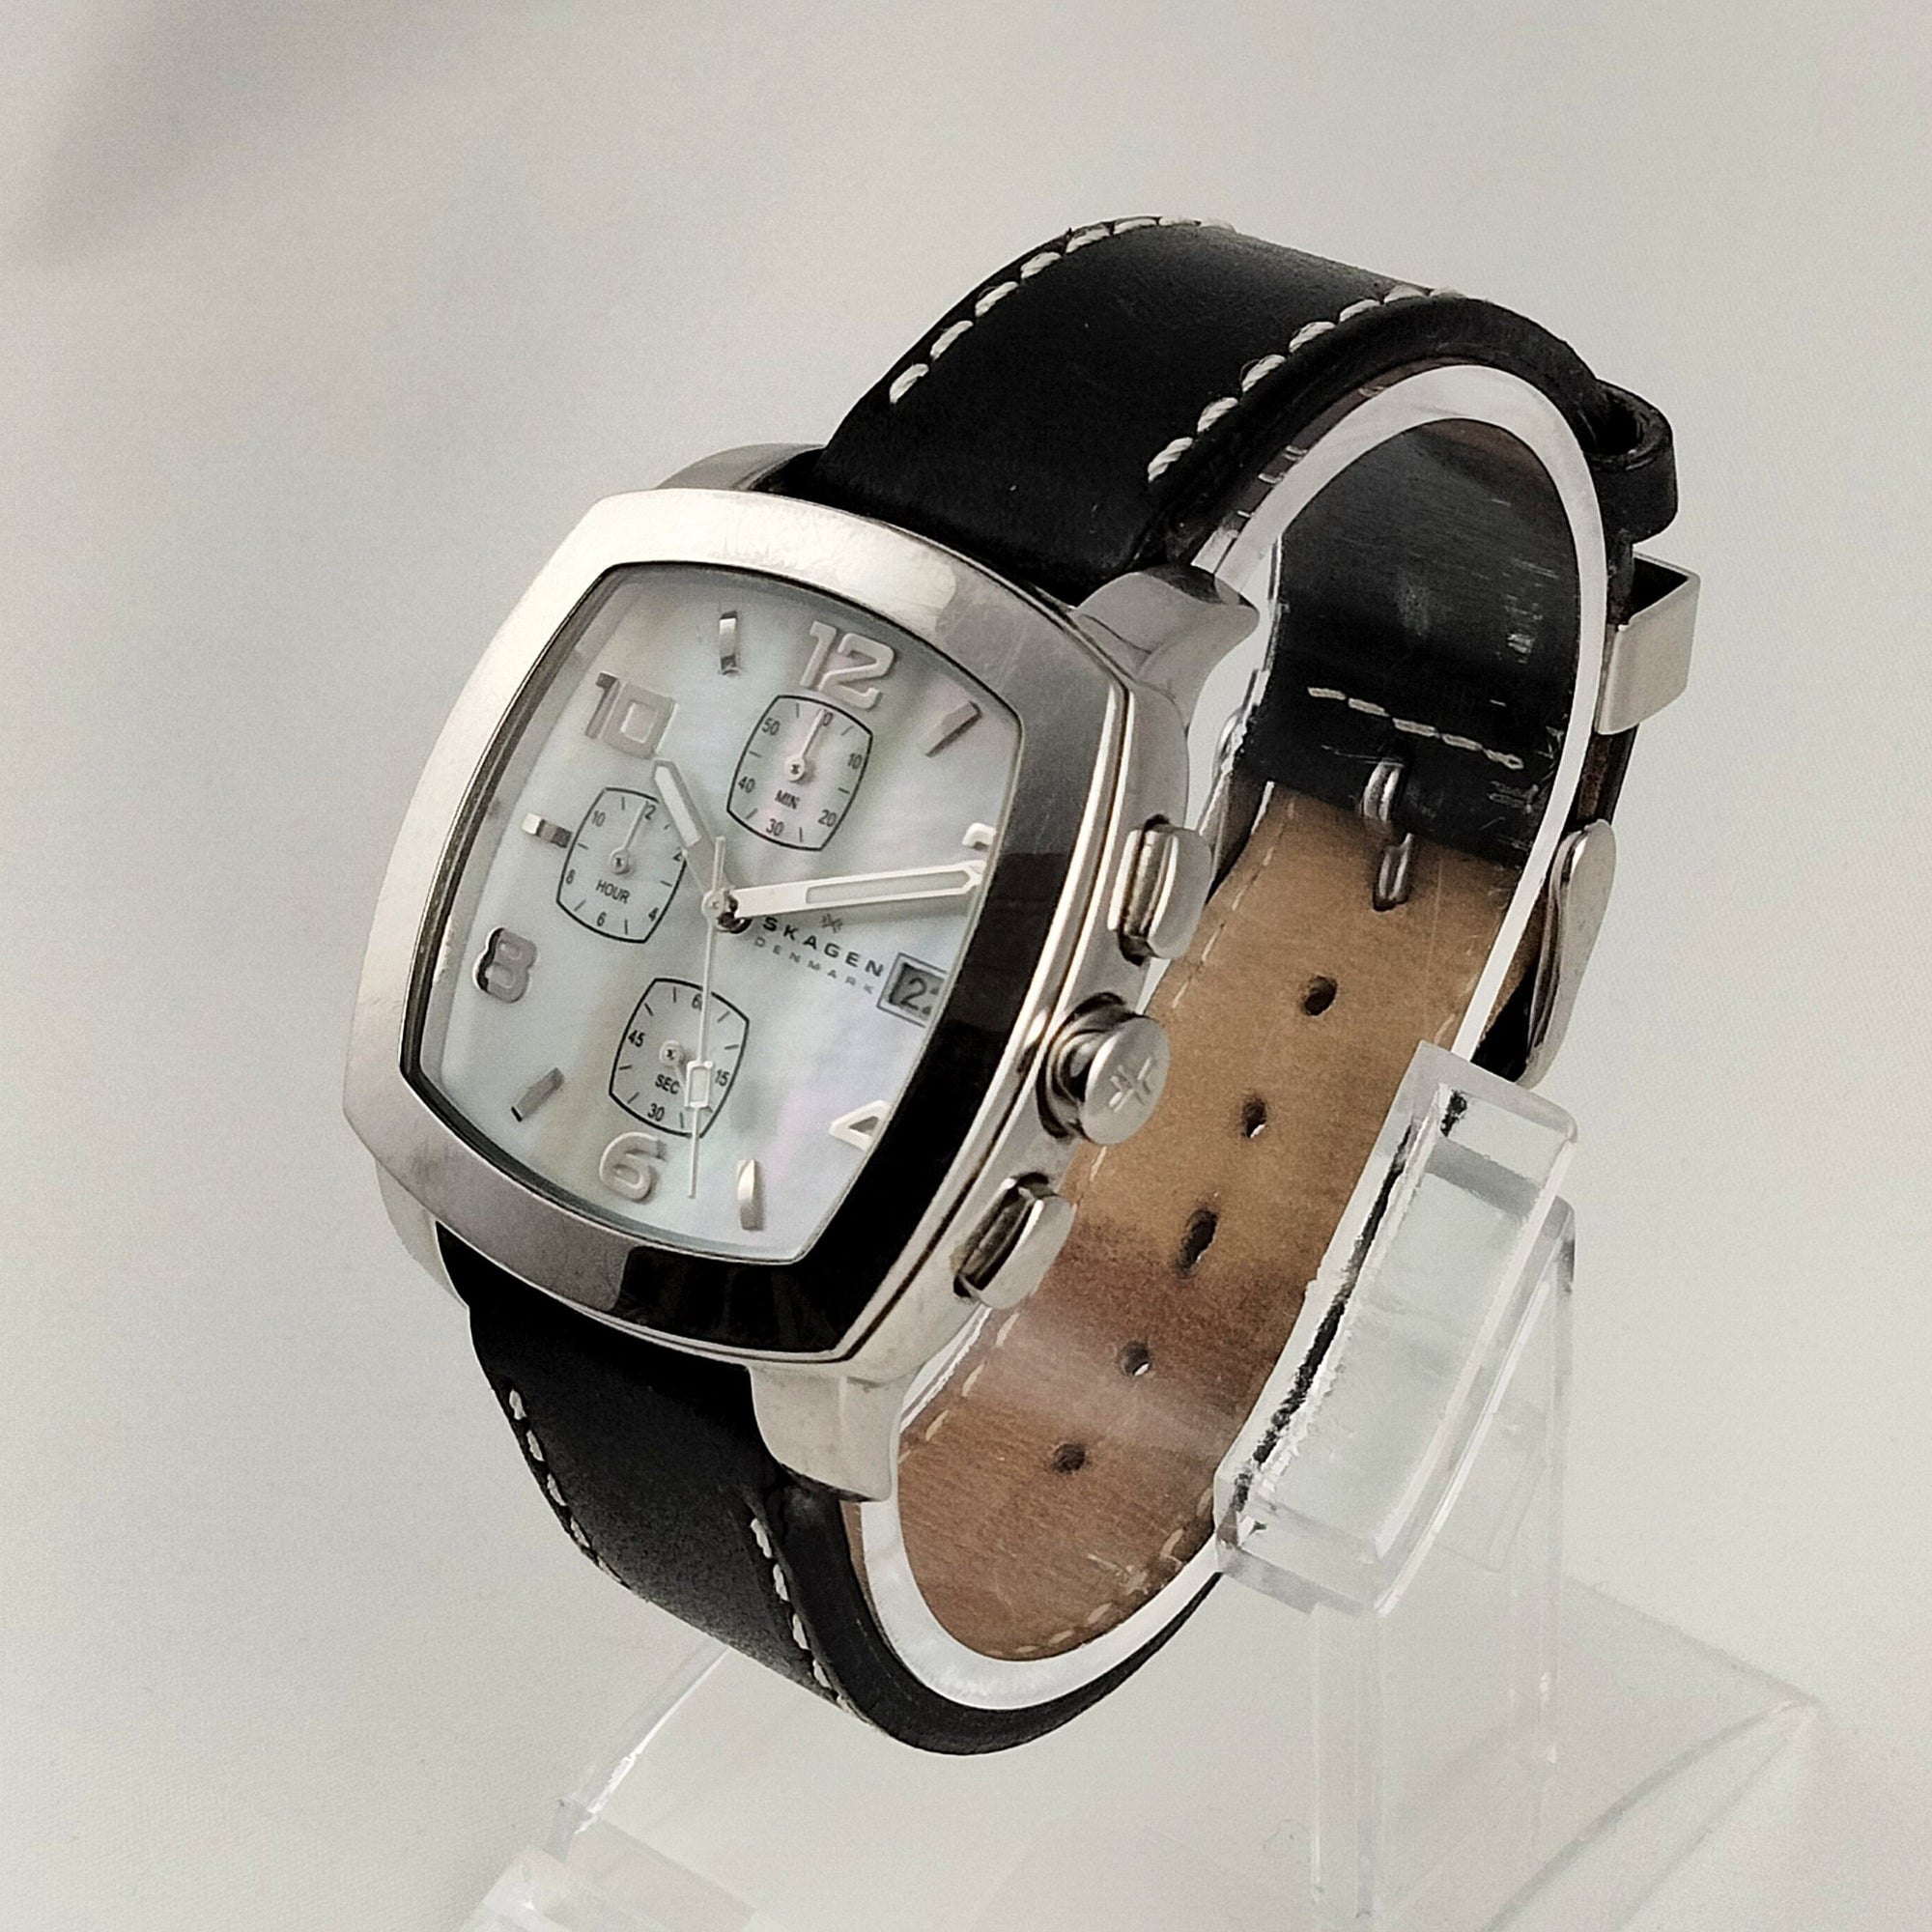 I Like Mikes Mid Century Modern Watches Skagen Men's Stainless Steel Square Chronograph Watch, Mother of Pearl Dial, Black Genuine Leather Strap